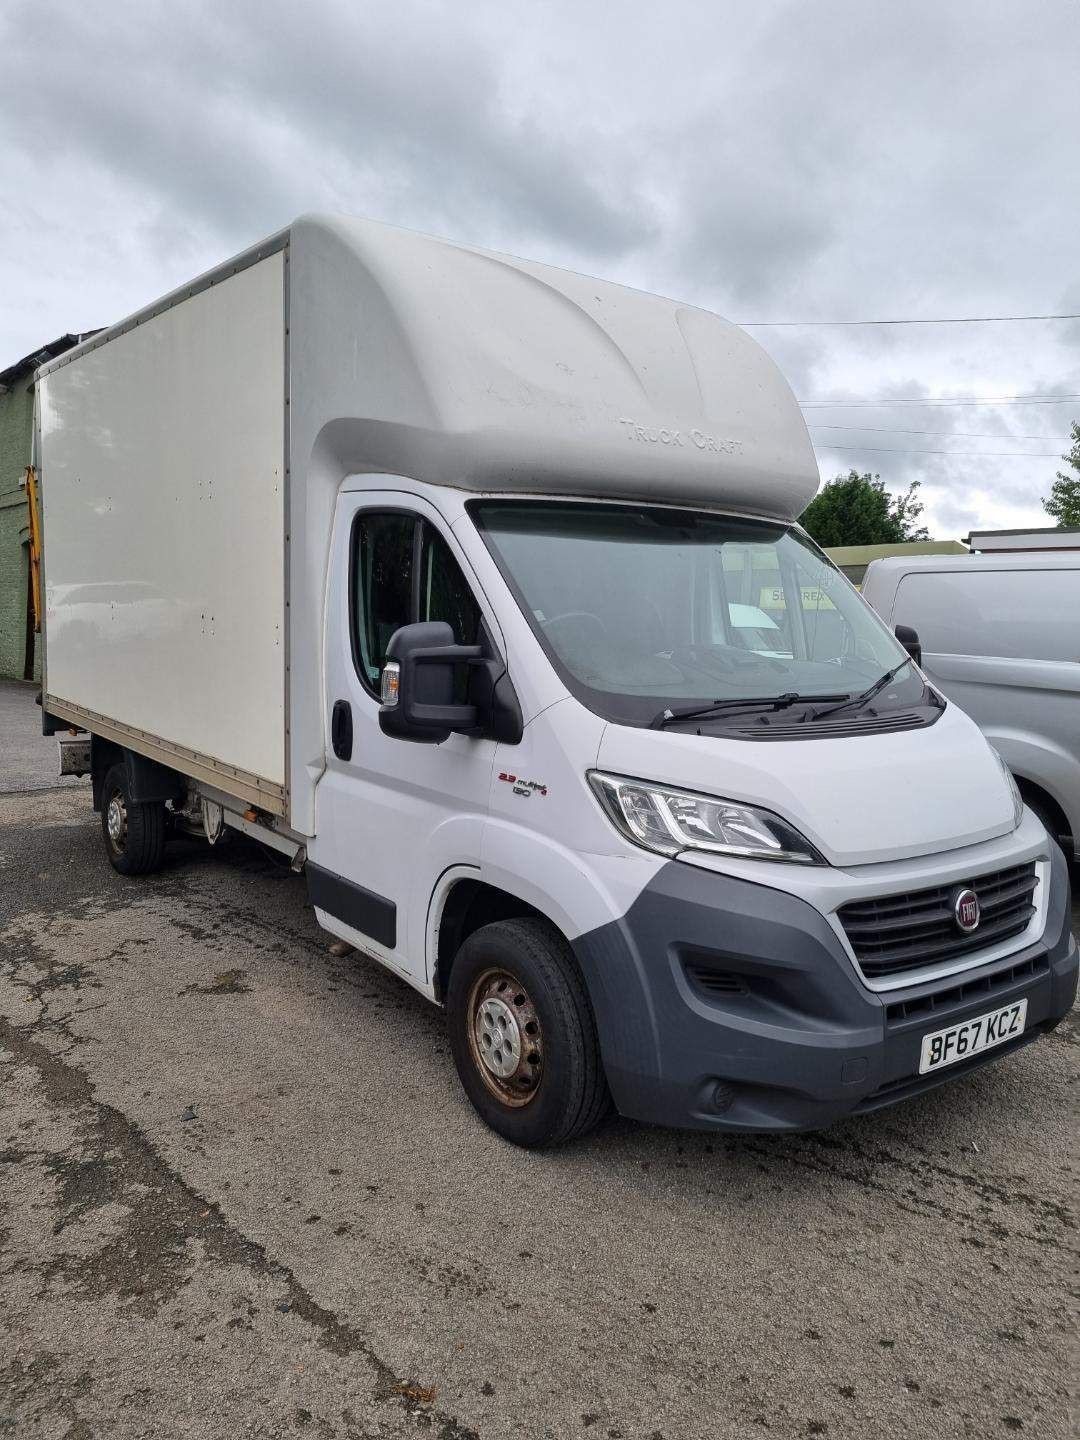 Used Fiat Ducato for sale in Manchester